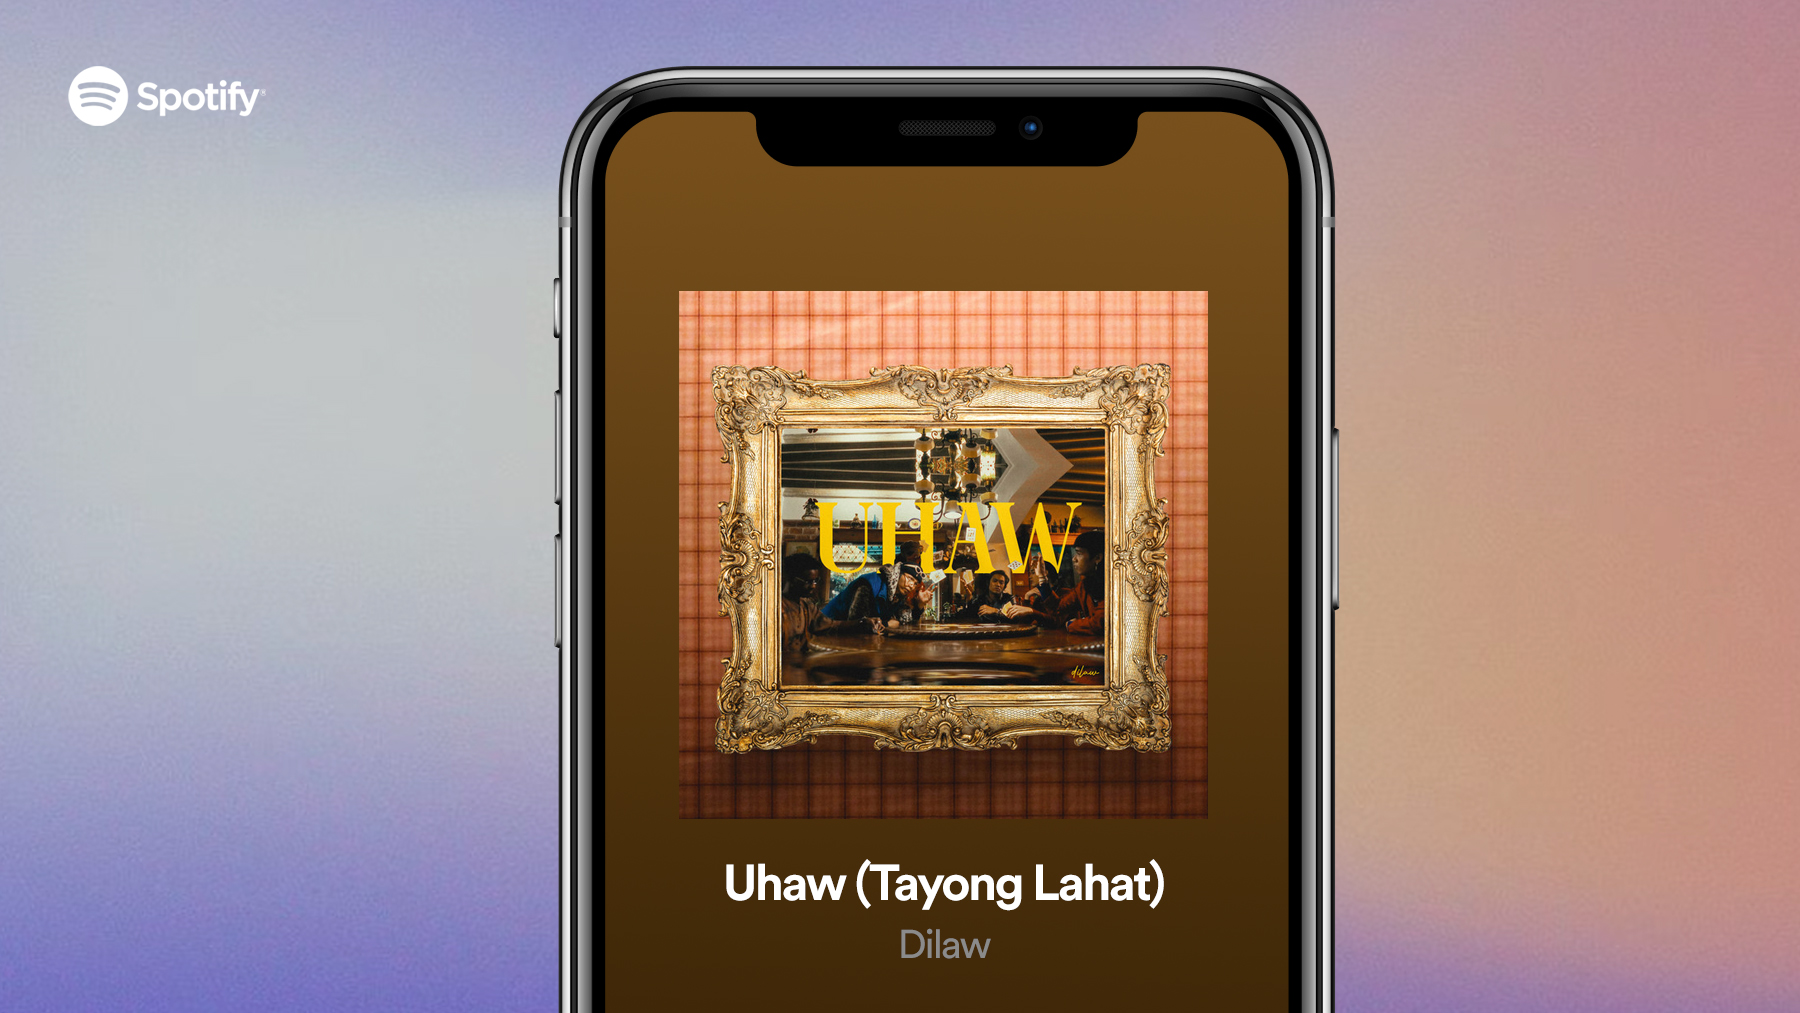 Dilaw’s “Uhaw (Tayong Lahat)” breaks Spotify record as the Philippines’ “Most Streamed Local Song in a Day”